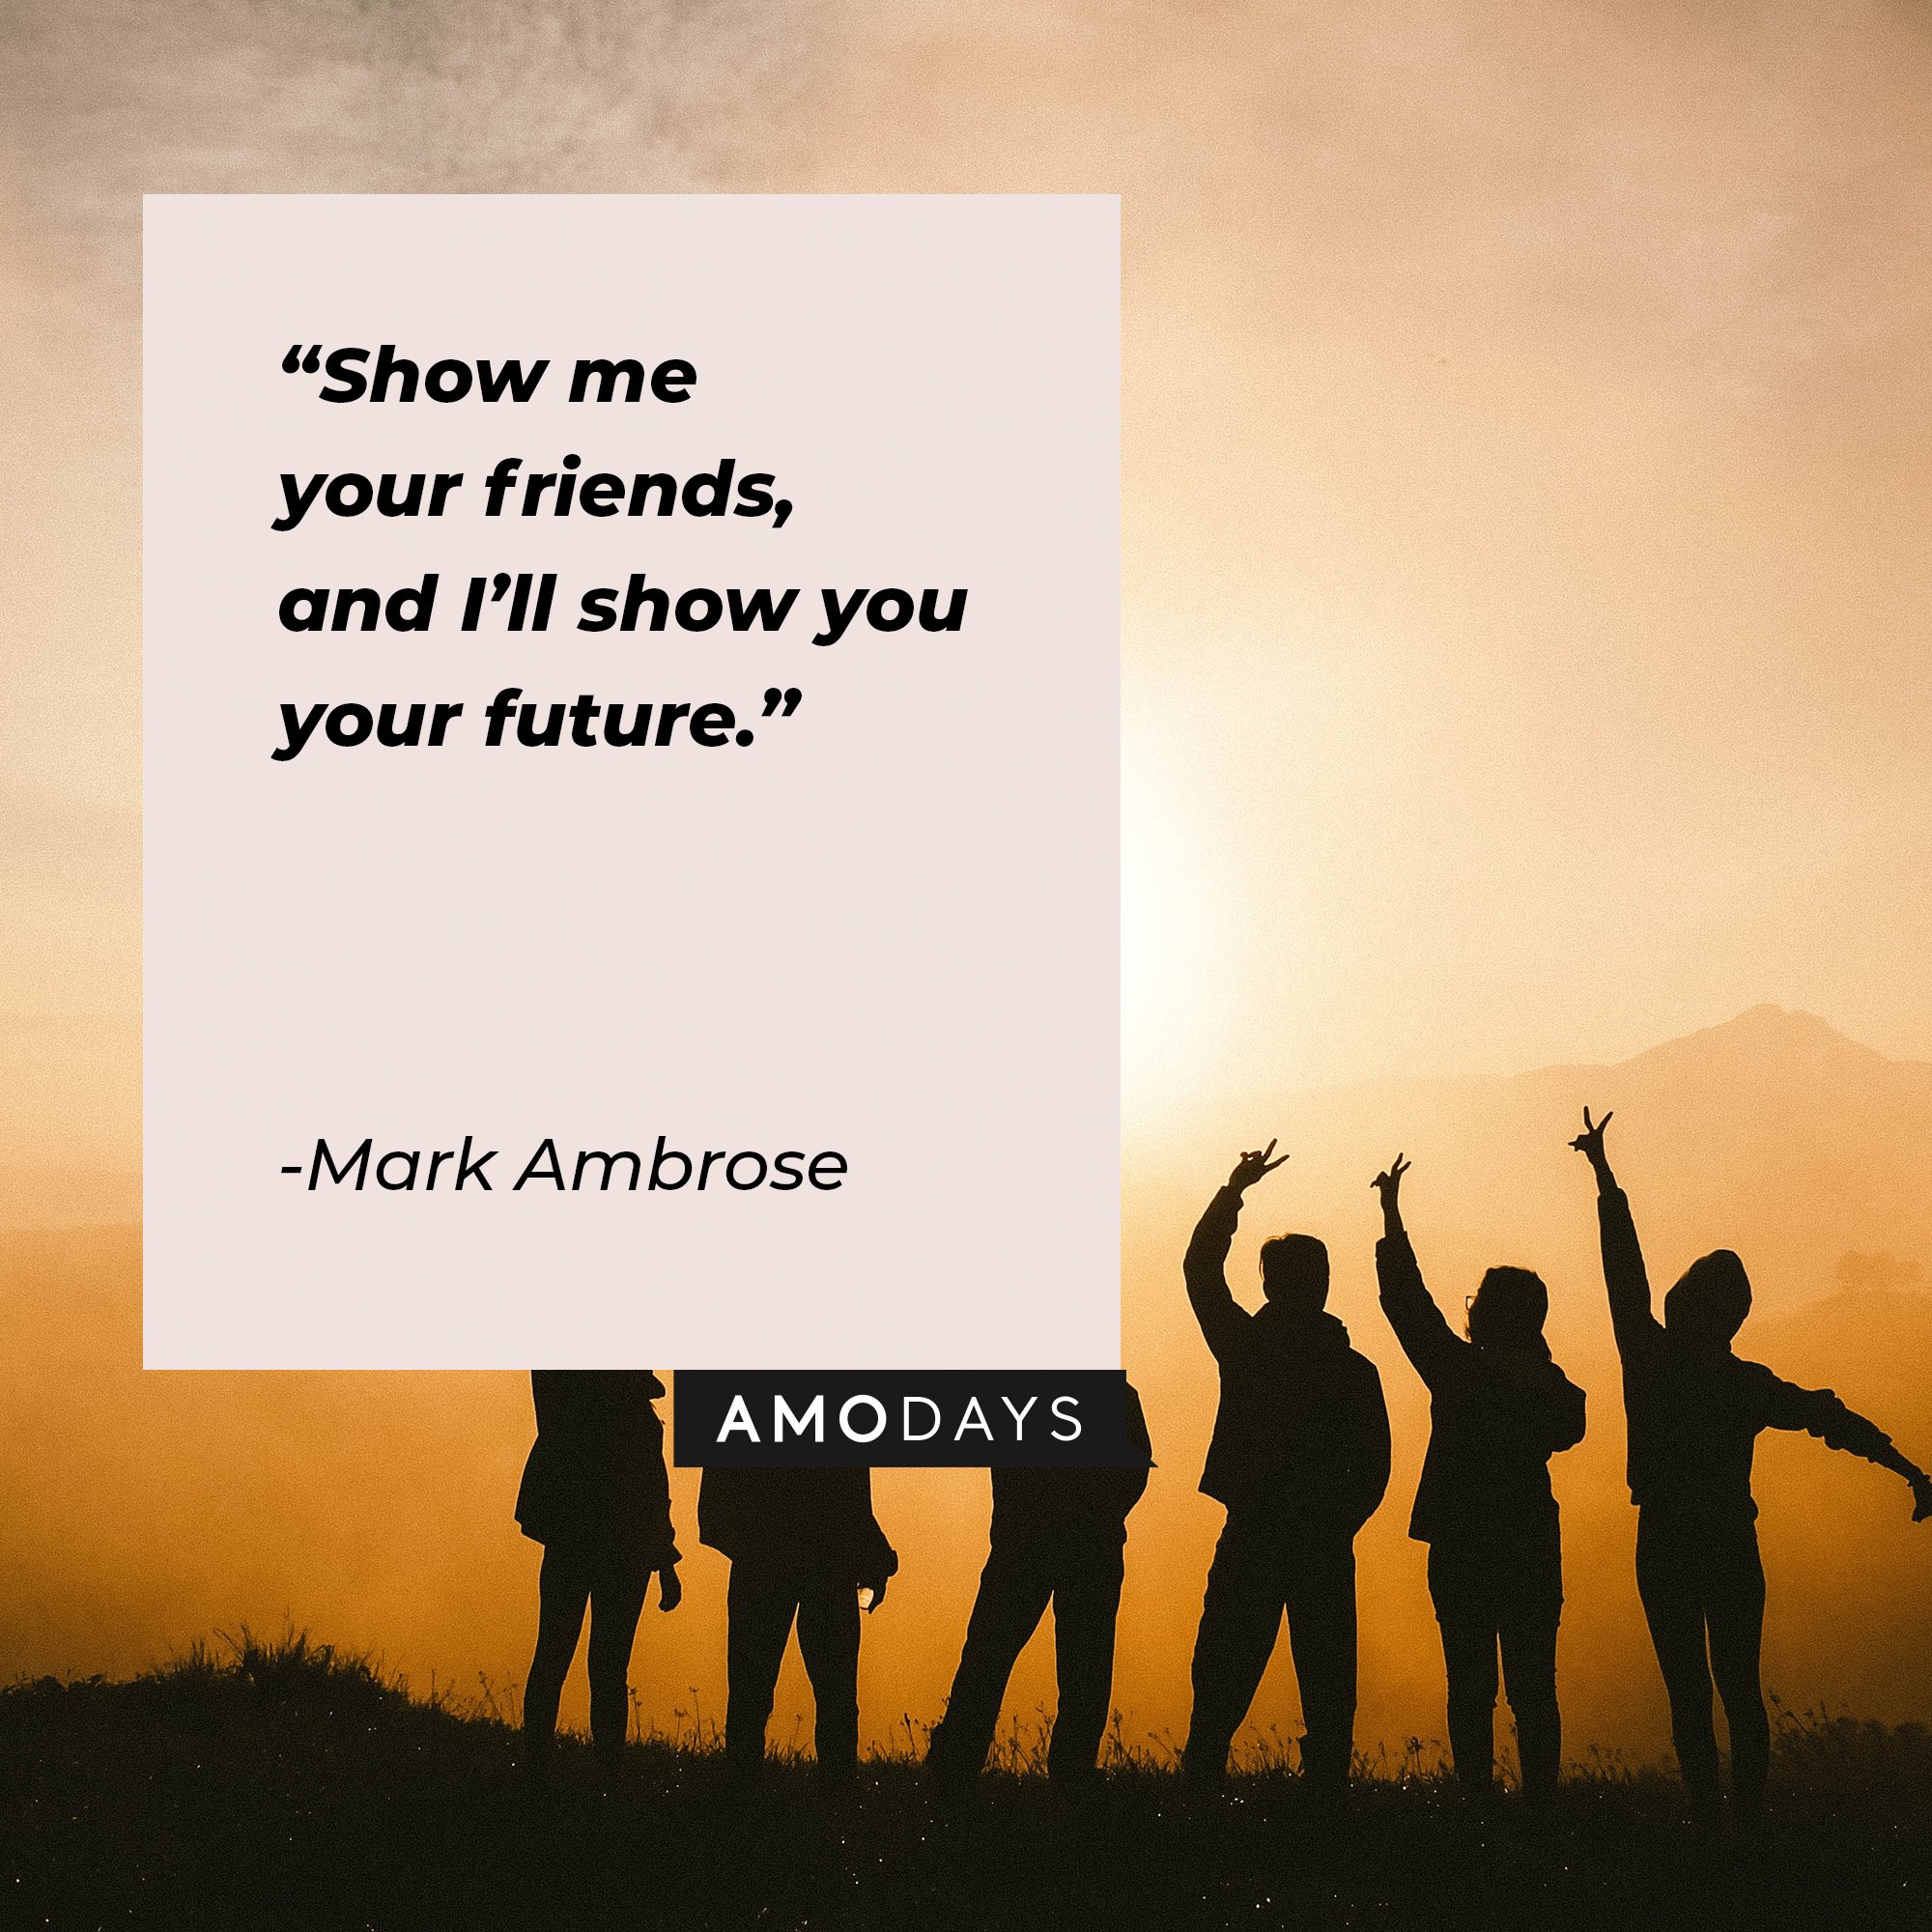 Mark Ambrose’s quote: “Show me your friends, and I’ll show you your future.” | Image: AmoDays